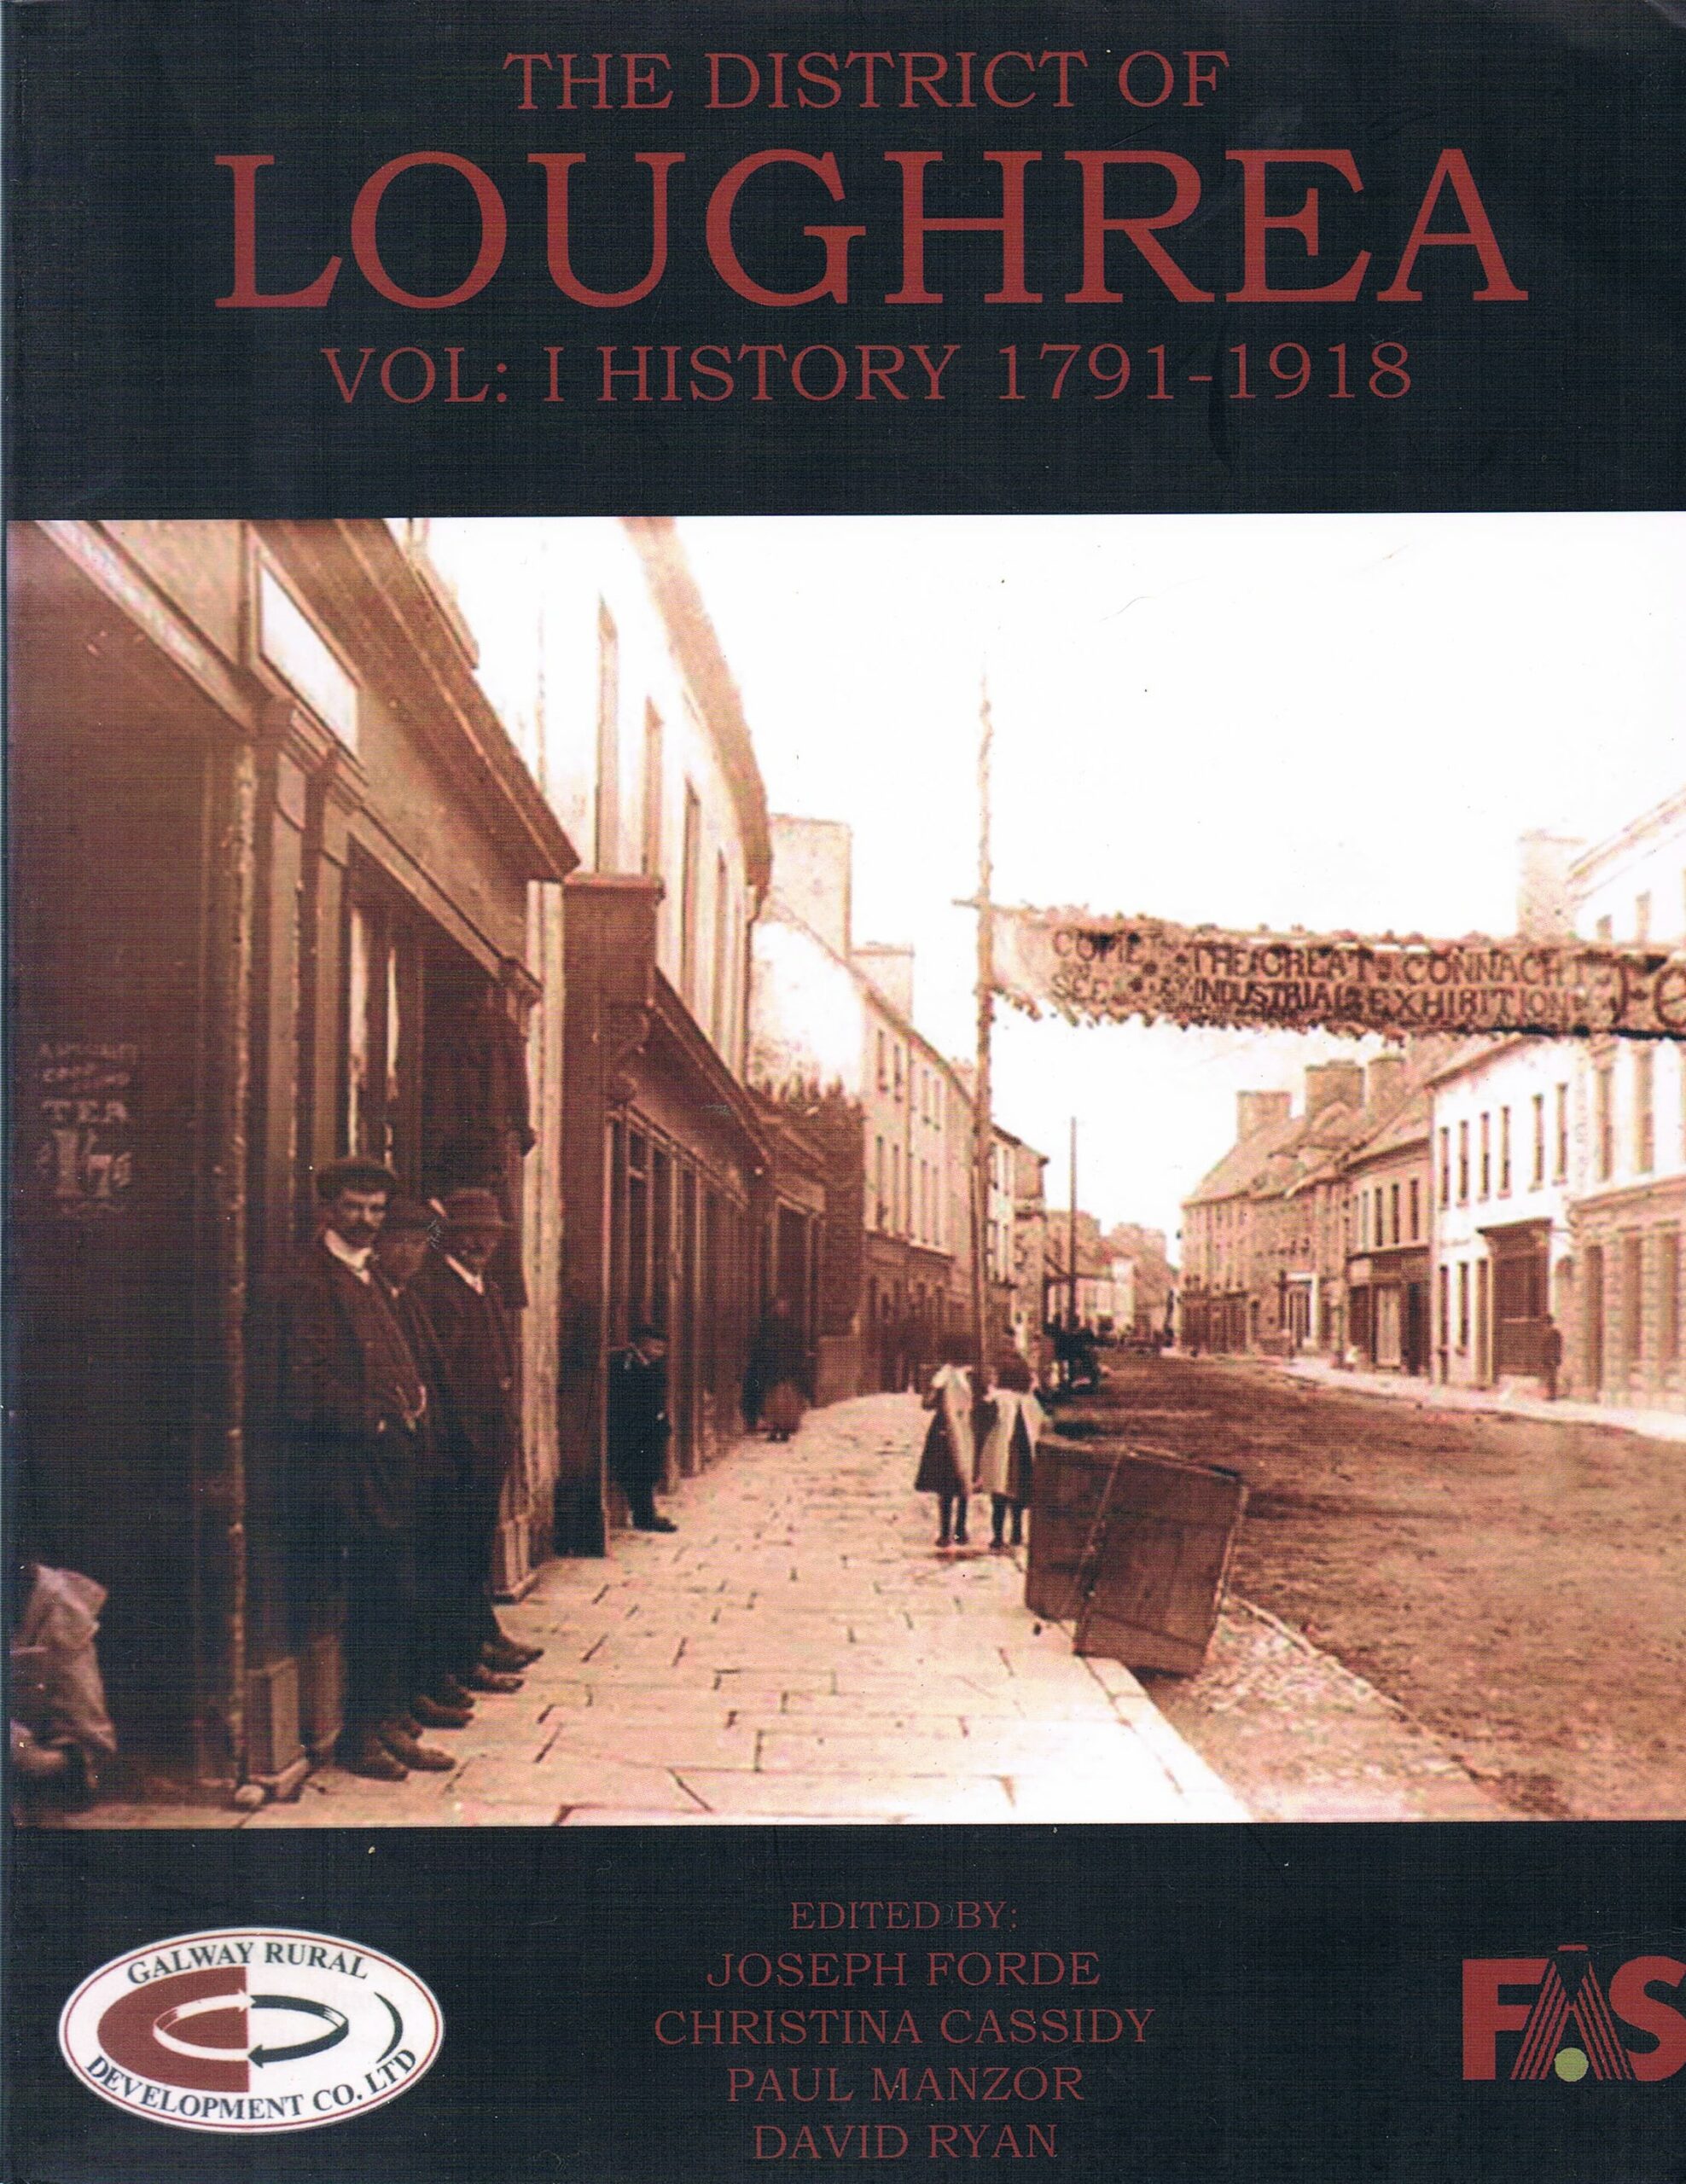 The District of Loughrea Vol: I History 1791 – 1918 by Joseph Forde, Paul Manzor & Christina Cassidy